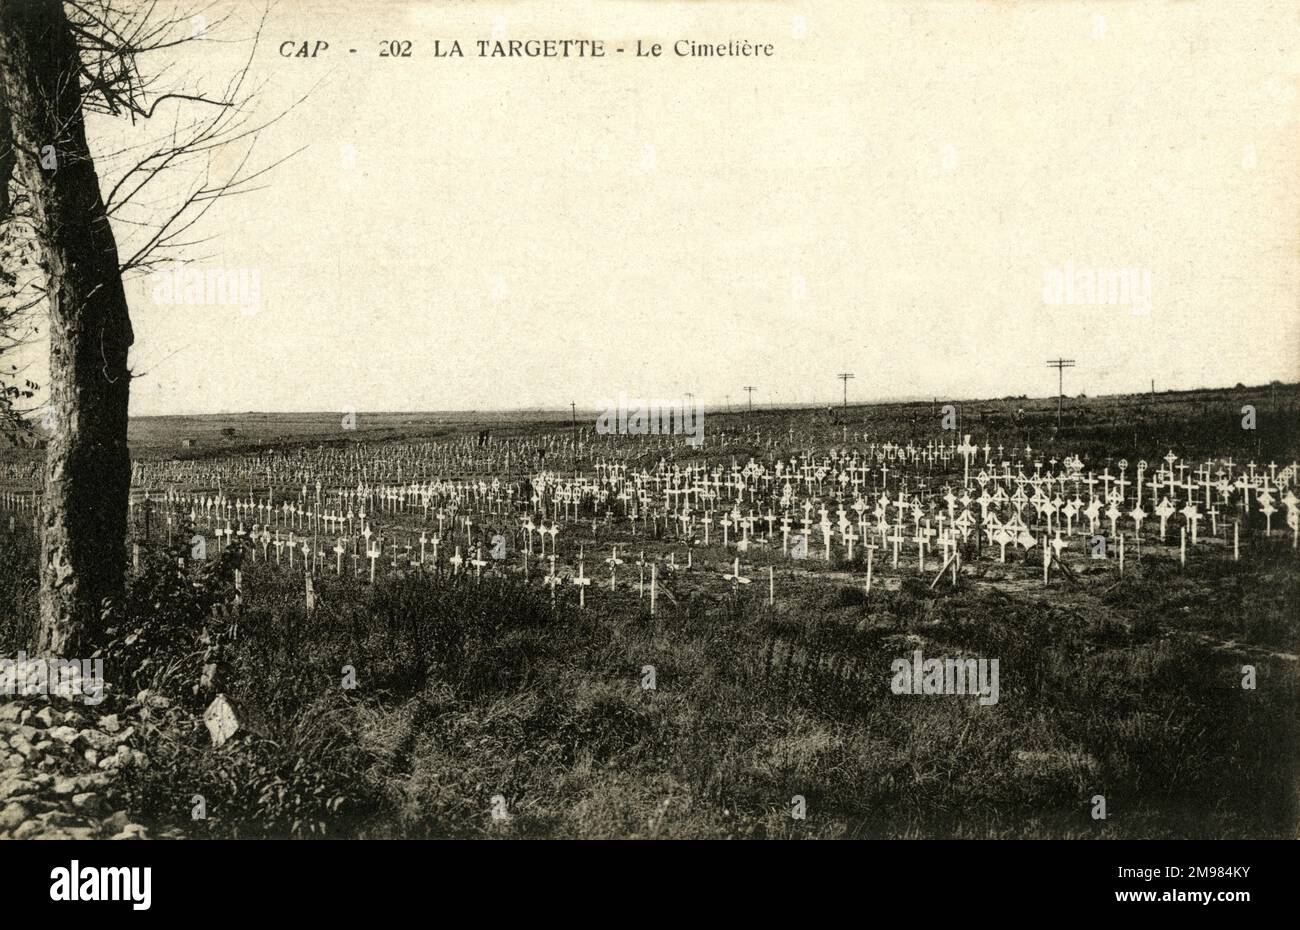 The La Targette area of the Neuville-Saint-Vaast military cemetery, located in Pas de Calais, northern France. It predominantly holds the graves of soldiers killed in the Second Battle of Artois, in May 1915. The cemetery opened in 1919 and contains the remains of 42,000 soldiers killed during the First World War. Stock Photo